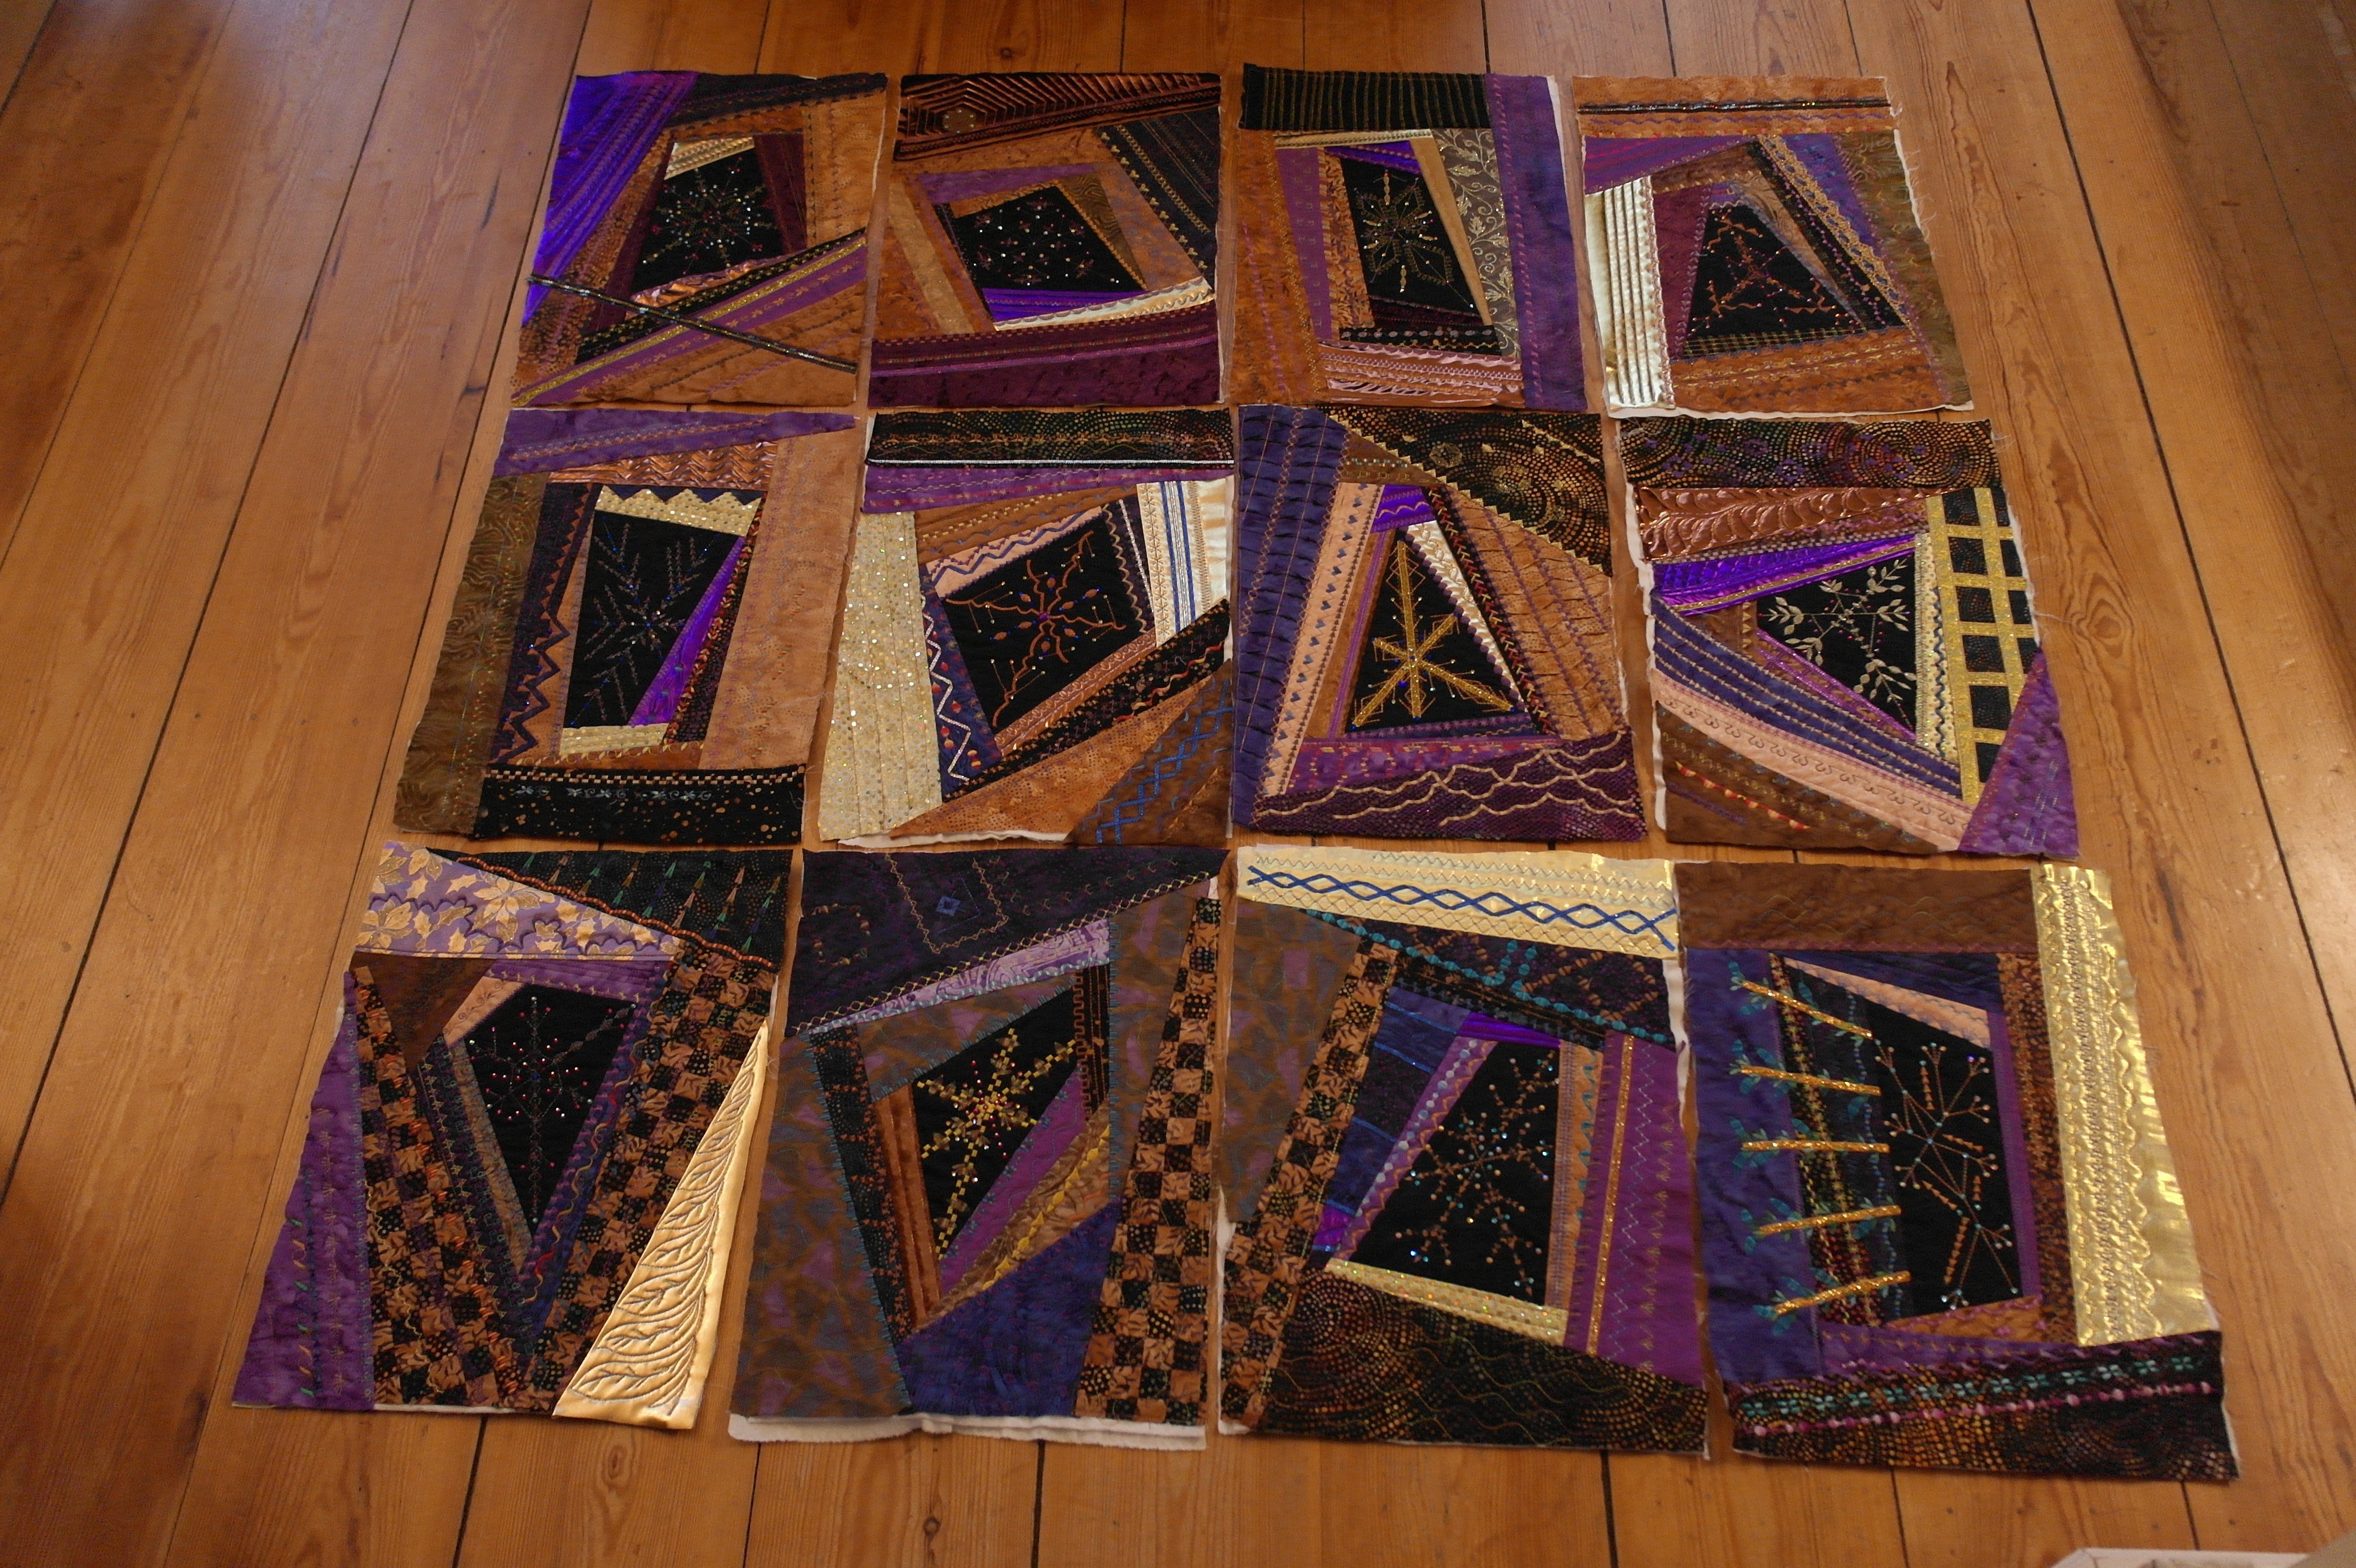 Assembling The Quilt Squares